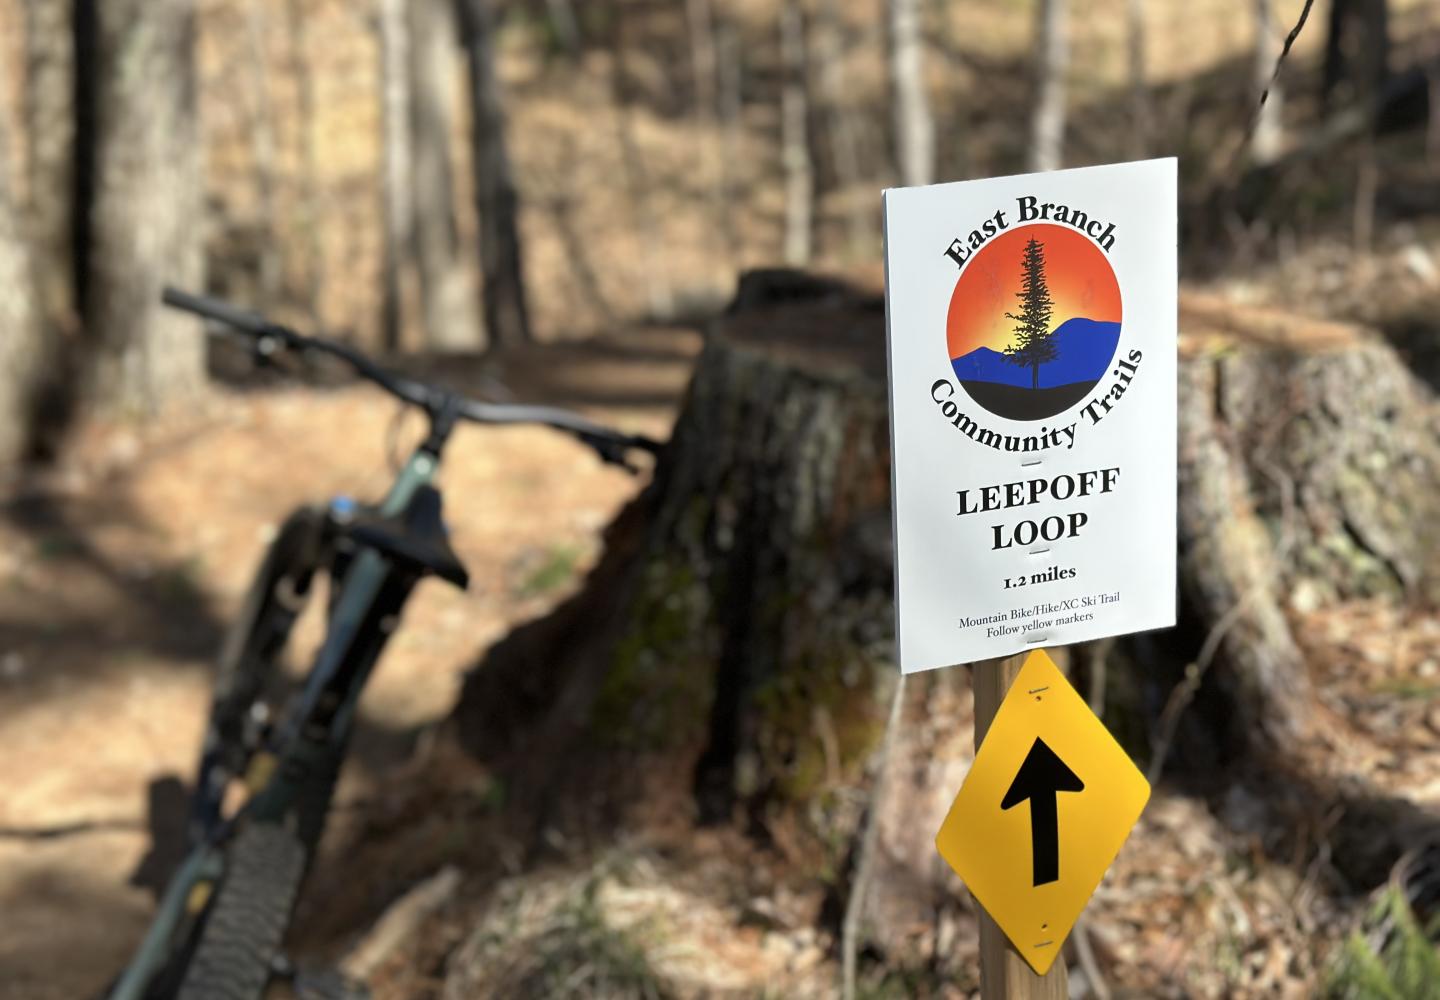 New trails are planned for the Barkeater Trails Alliance network in Keene and Elizabethtown